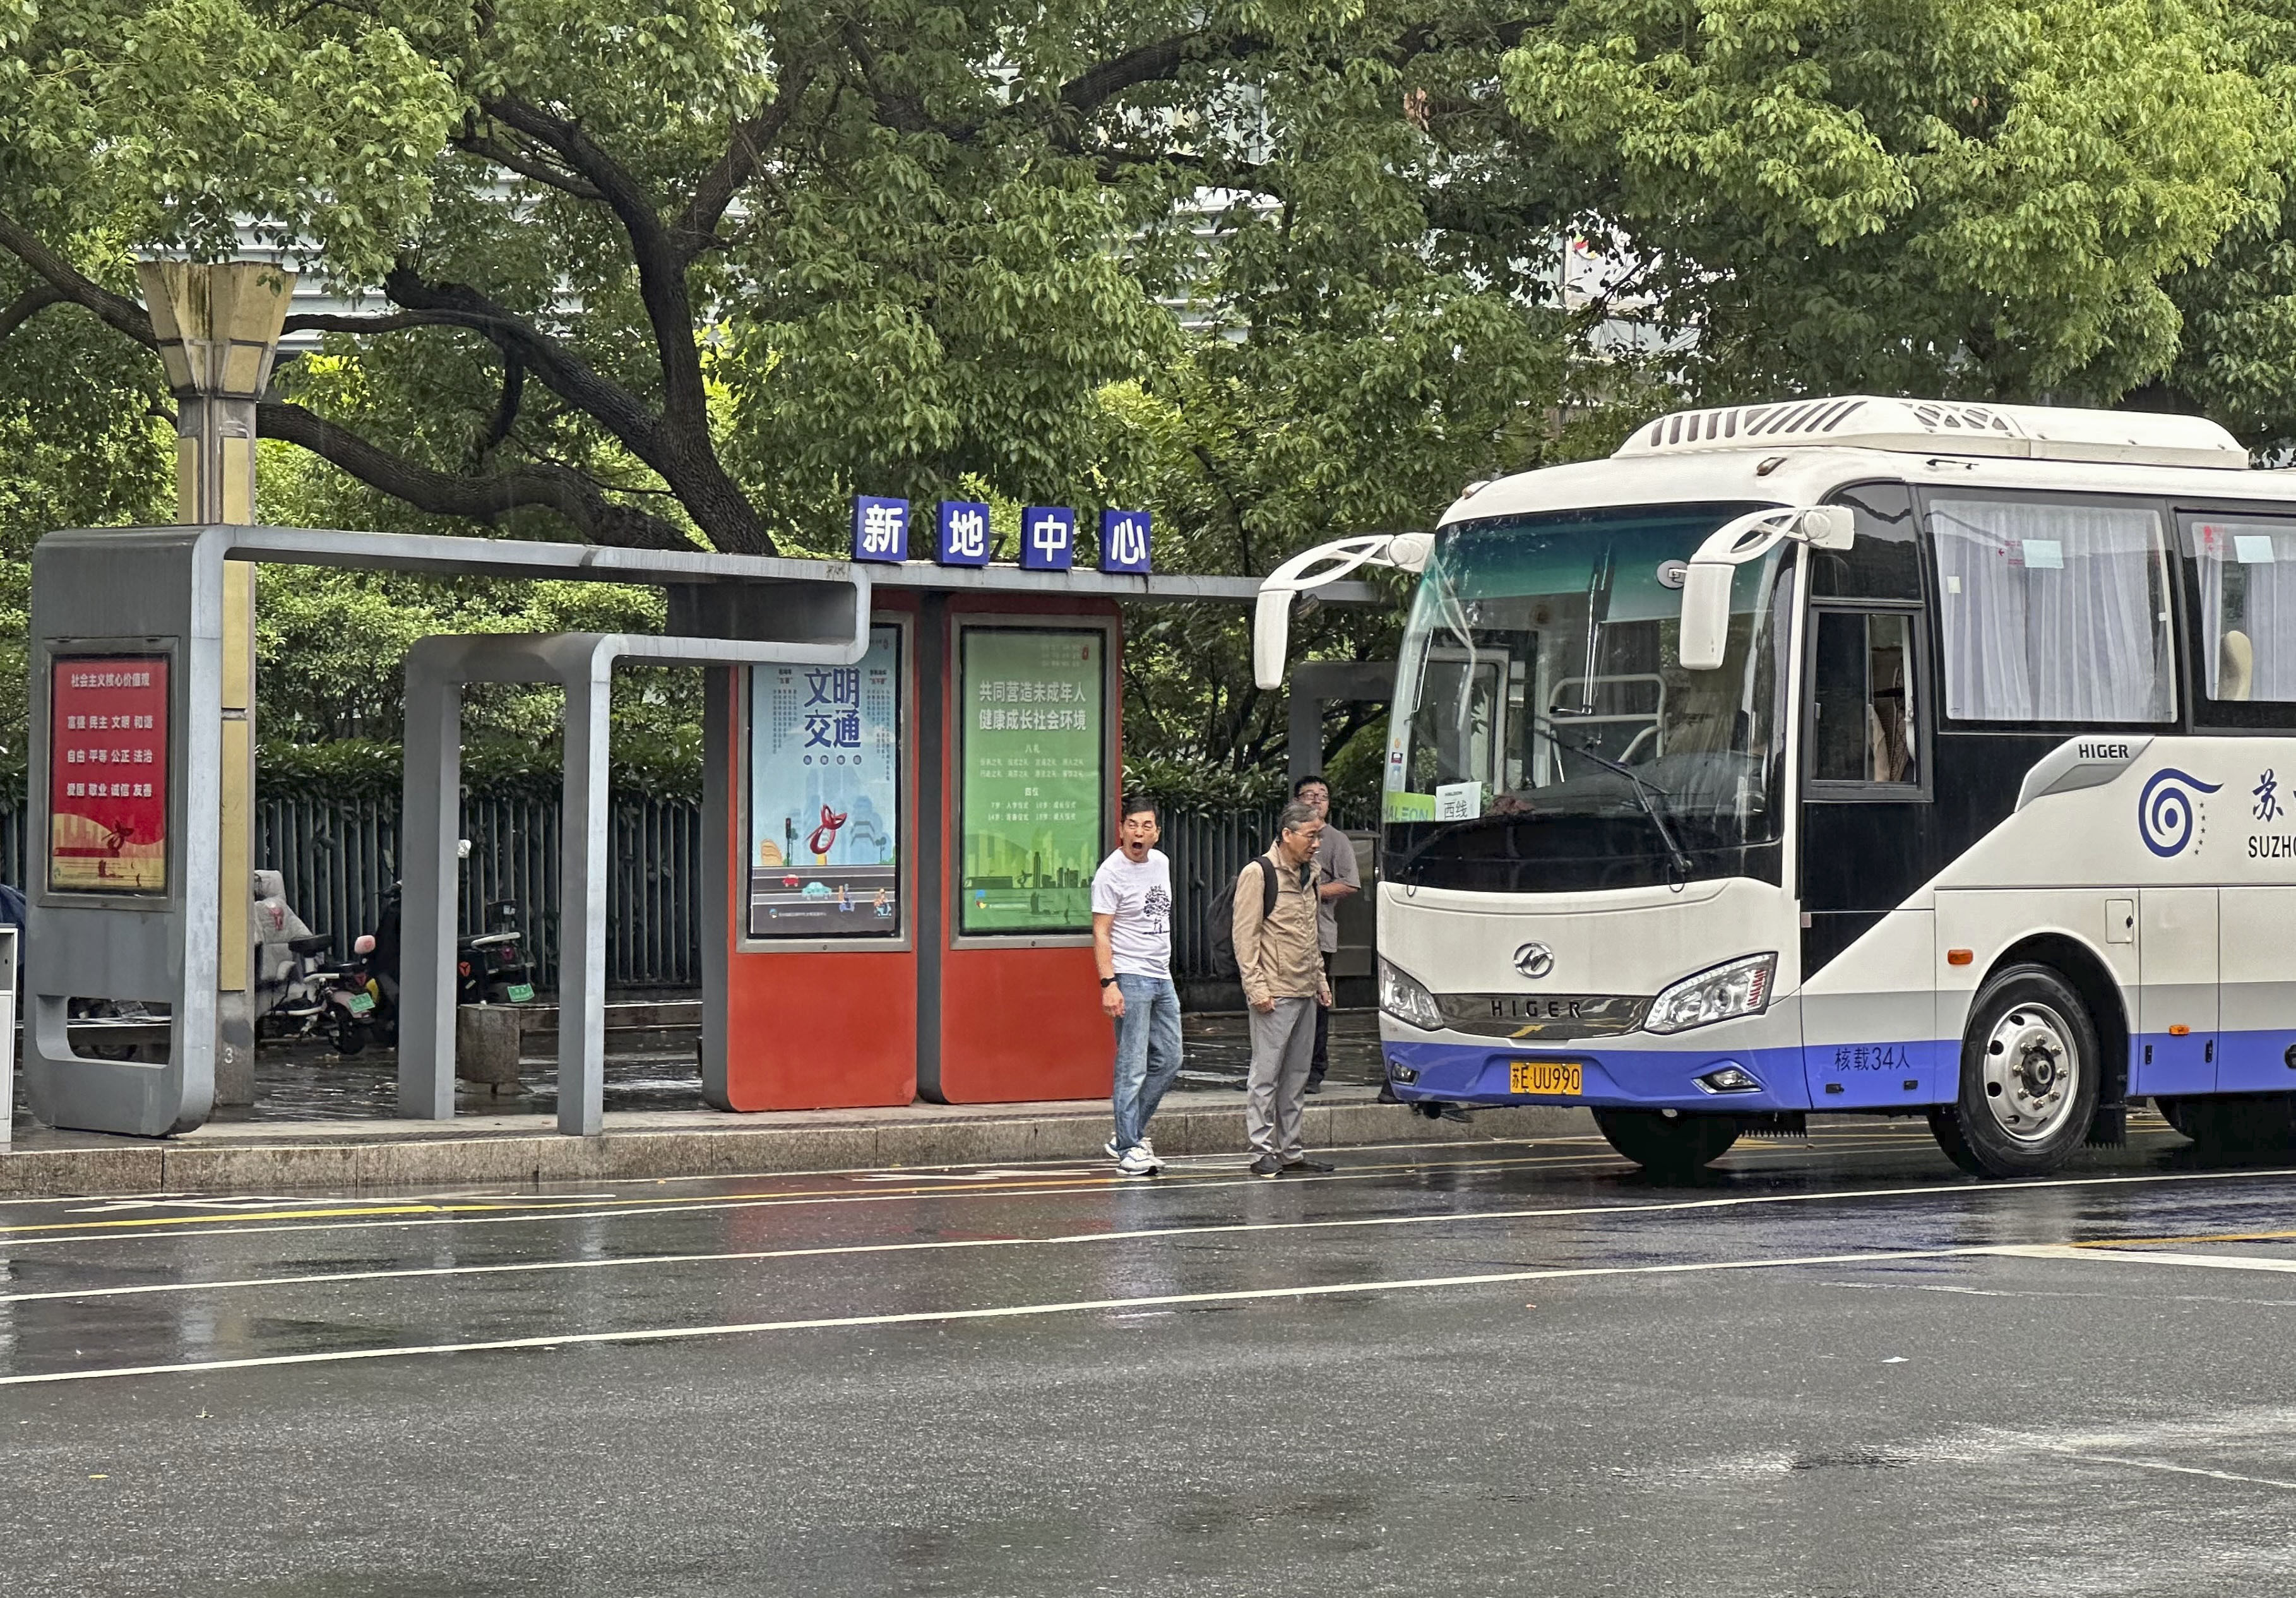 The bus stop in Suzhou, near Shanghai, where a Japanese woman, her son and a Chinese woman were stabbed on Monday. Photo: Kyodo